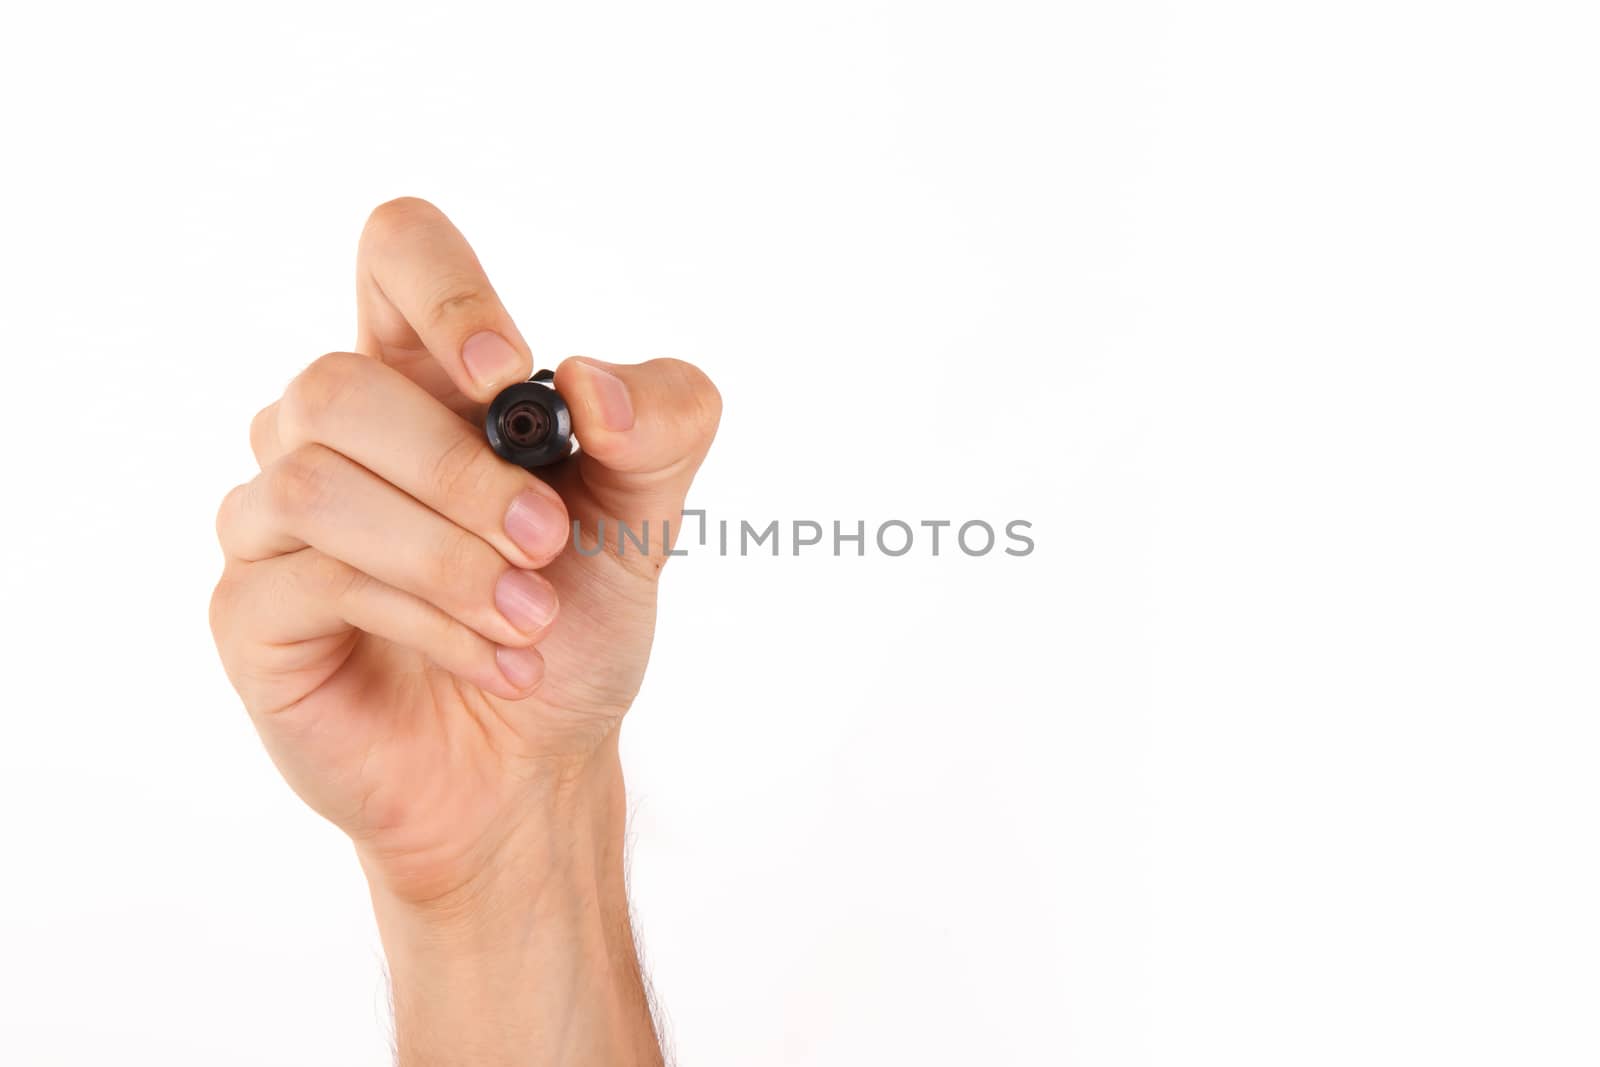 Human hand holding marker and writing or drawing, isolated on white background with space for text.